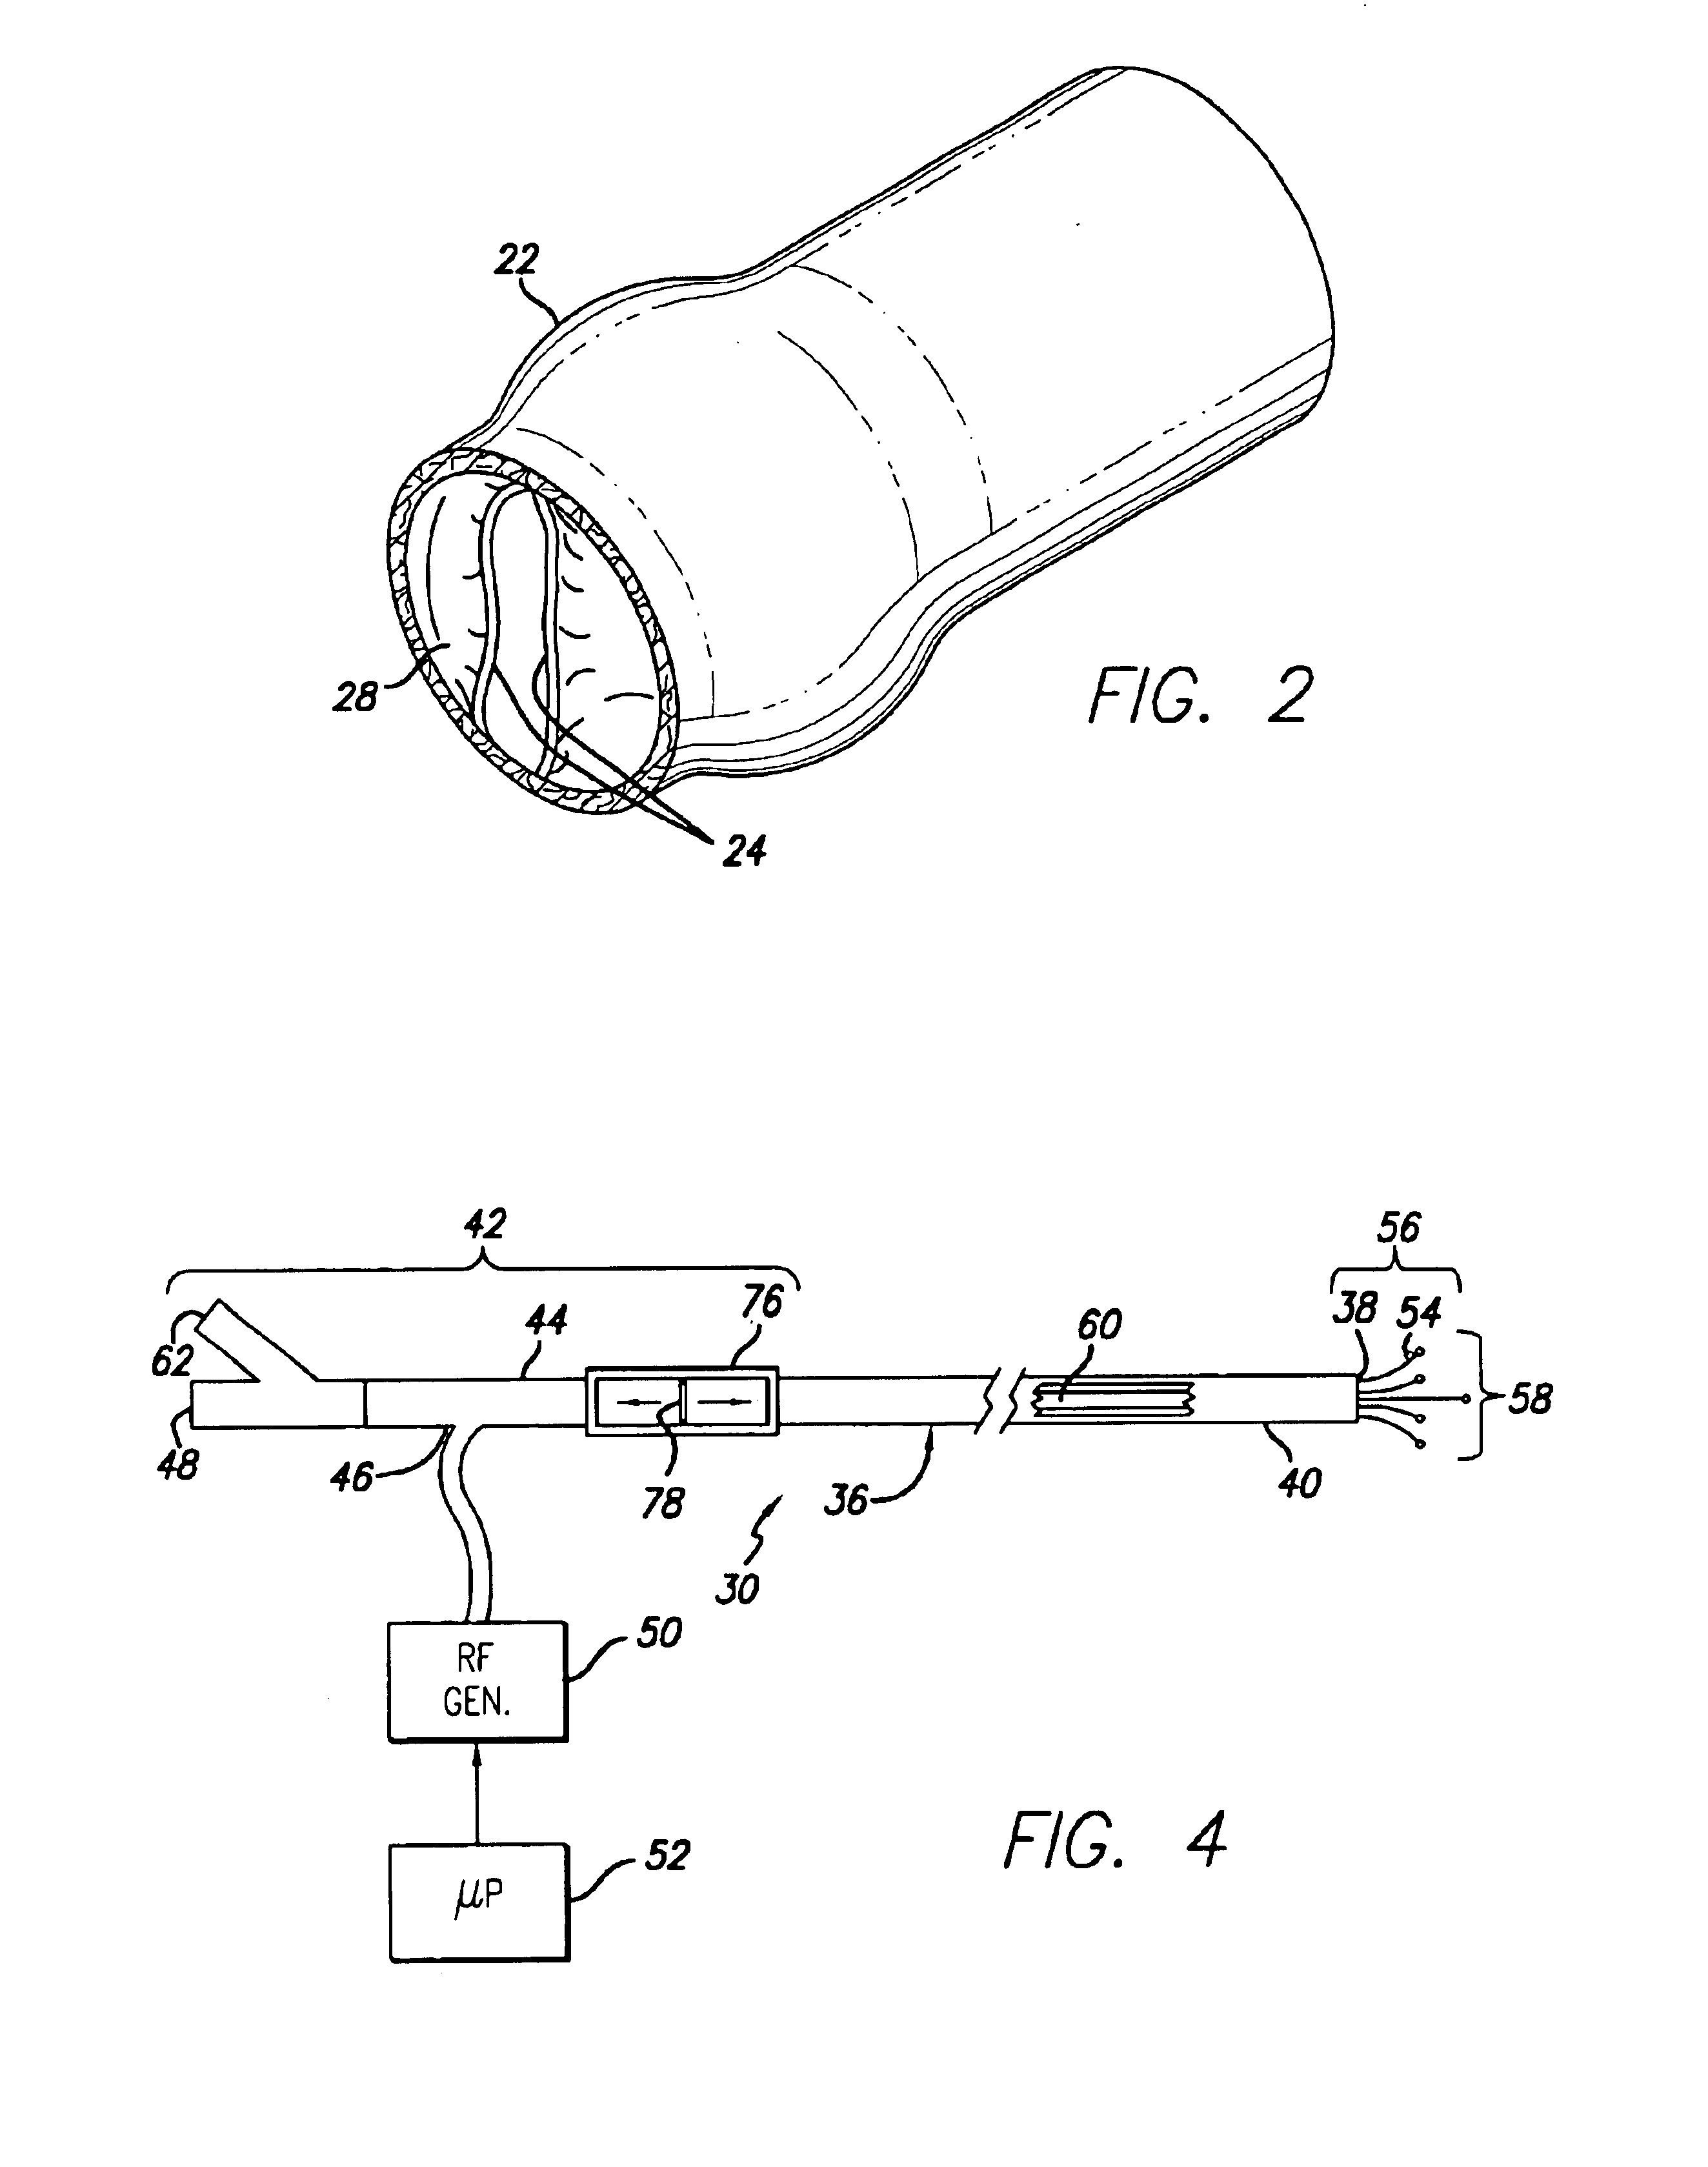 Apparatus for applying energy to biological tissue including the use of tumescent tissue compression